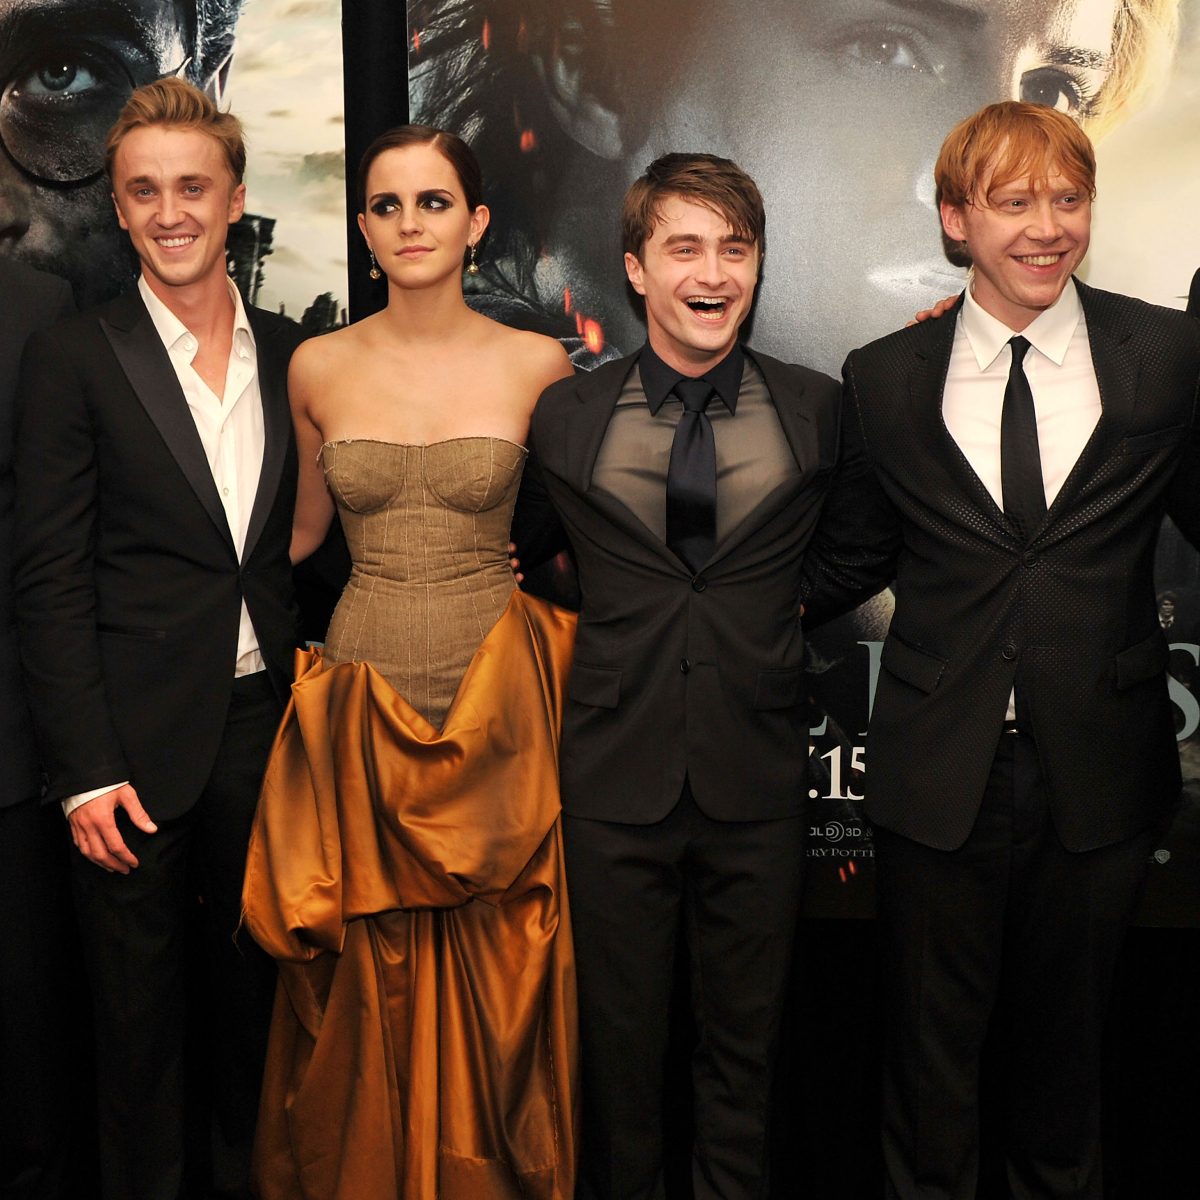 Immensely talented Harry Potter actors